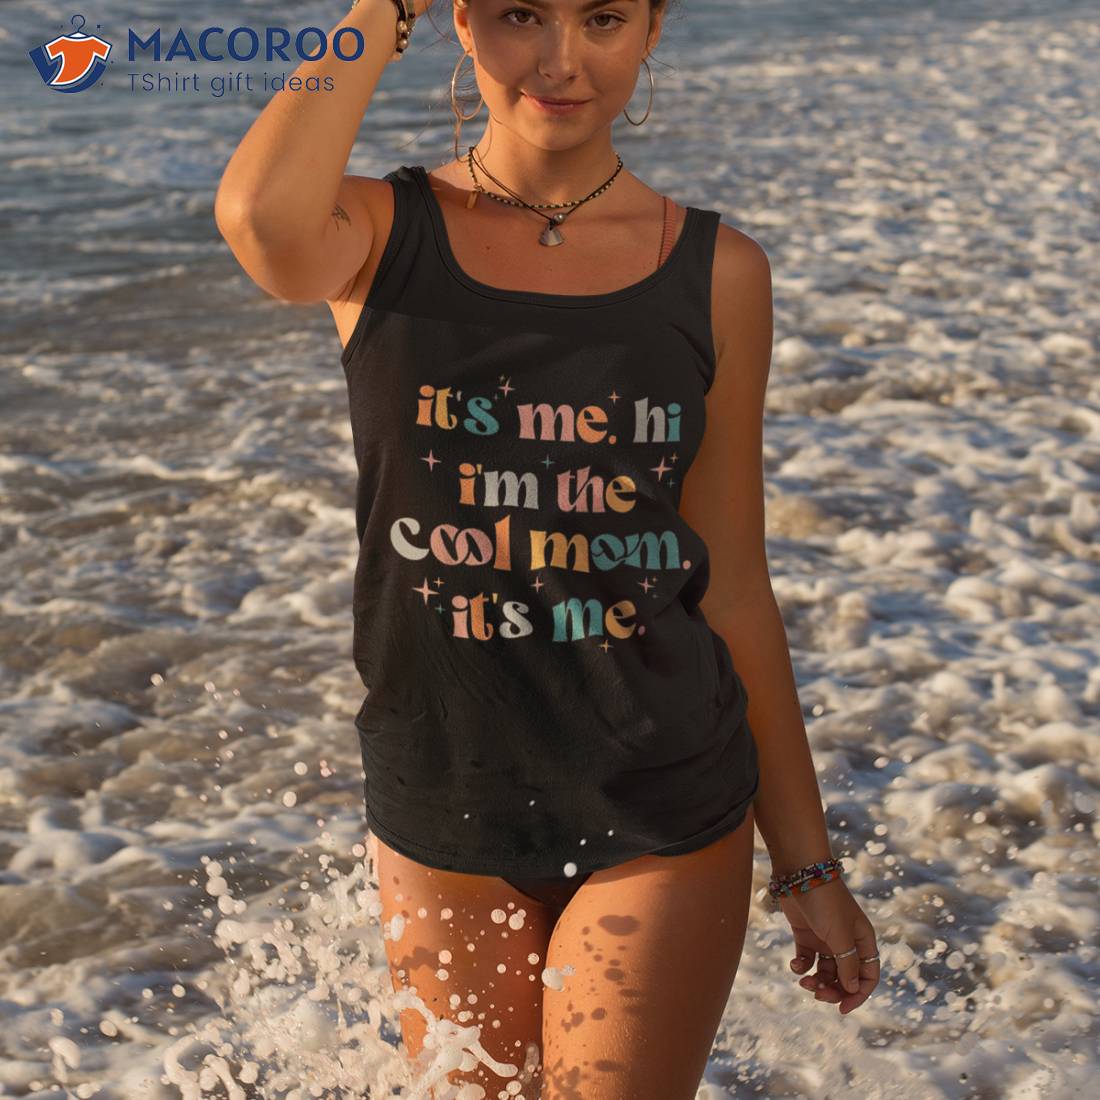 https://images.macoroo.com/wp-content/uploads/2023/04/its-me-hi-im-the-cool-mom-mothers-day-groovy-shirt-tank-top-3.jpg